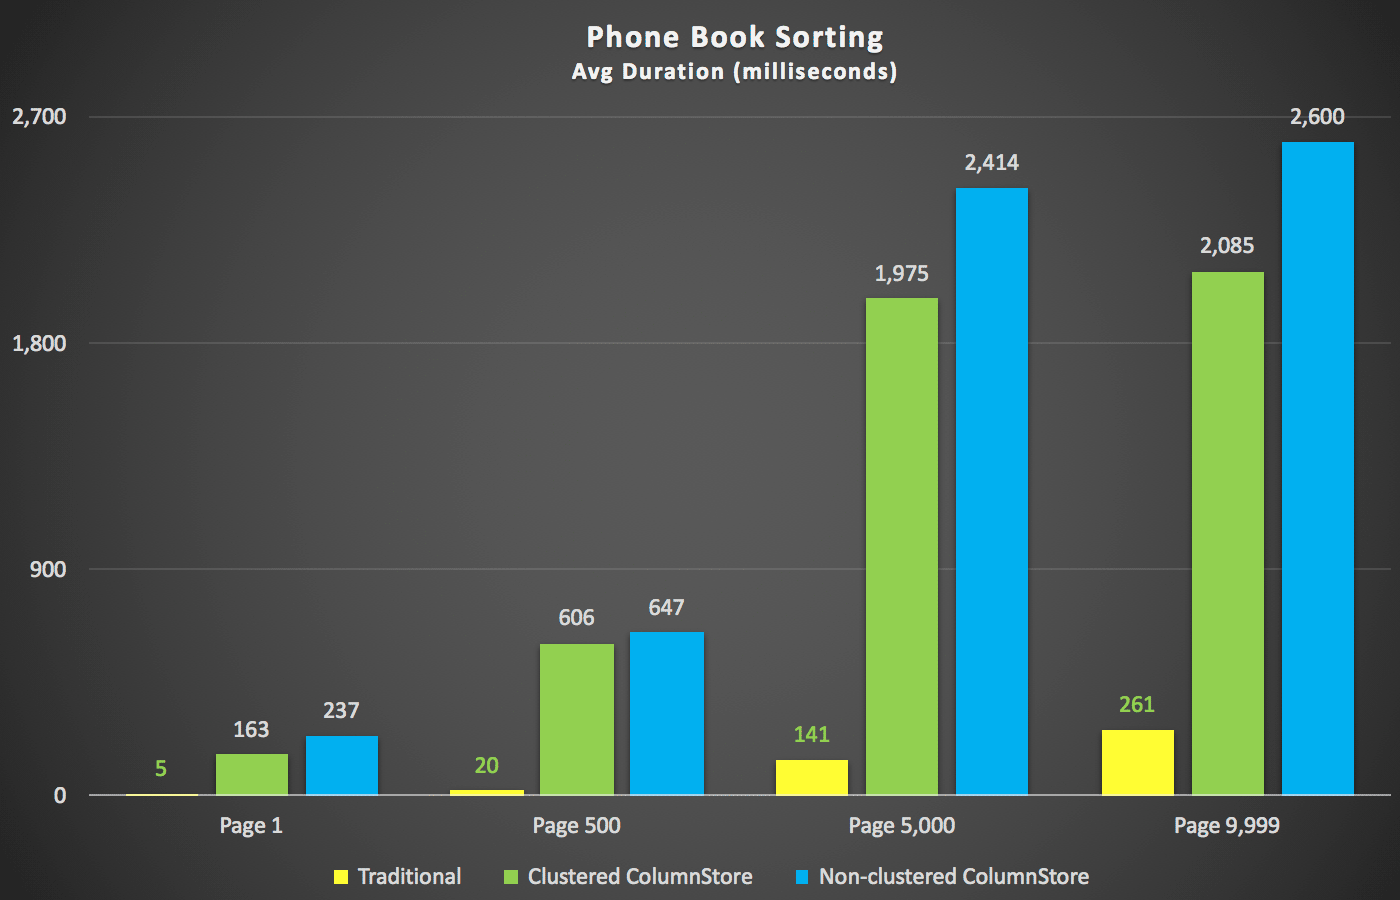 Duration (milliseconds) for phone book sorting